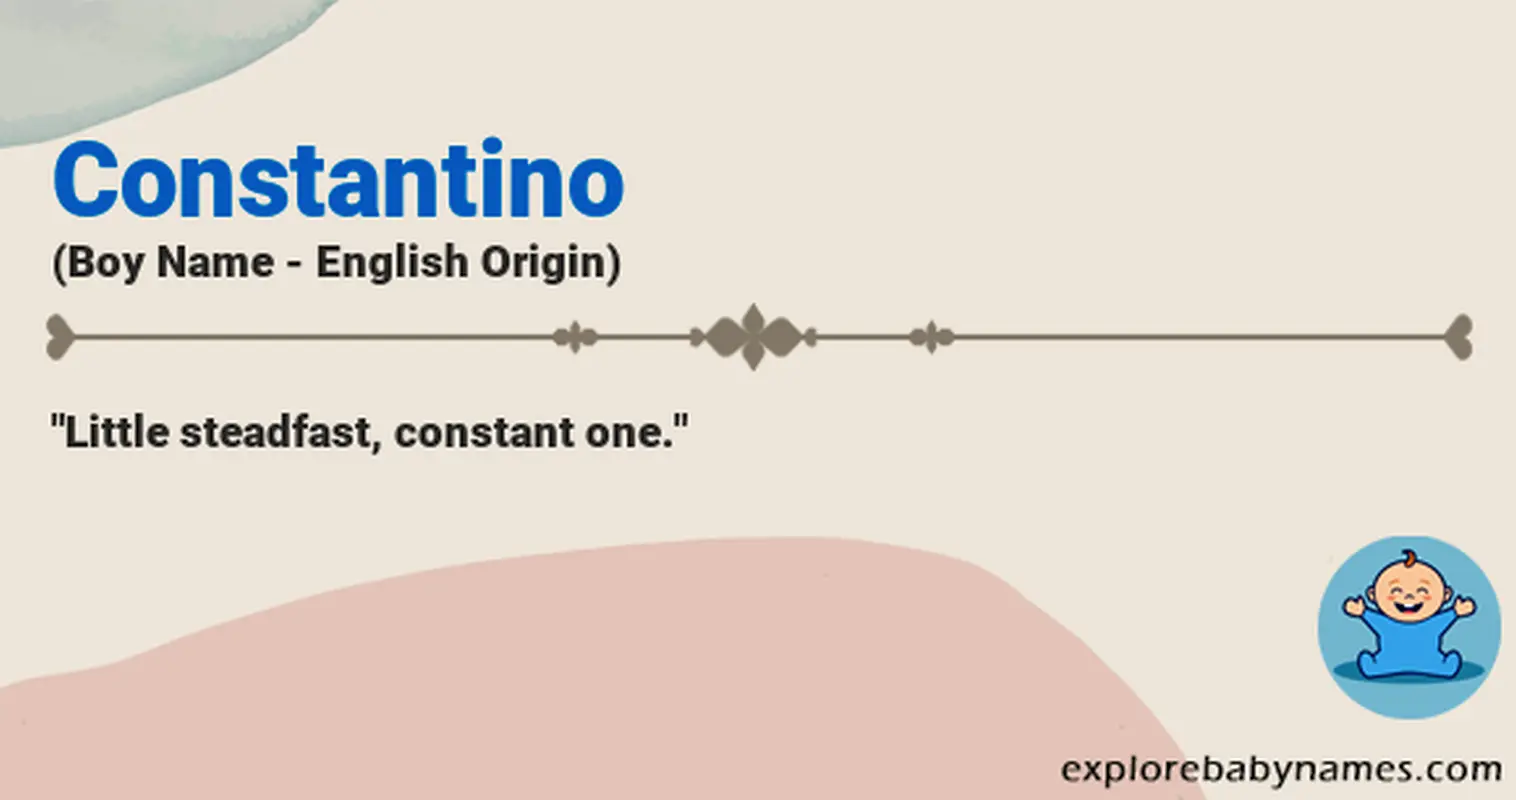 Meaning of Constantino